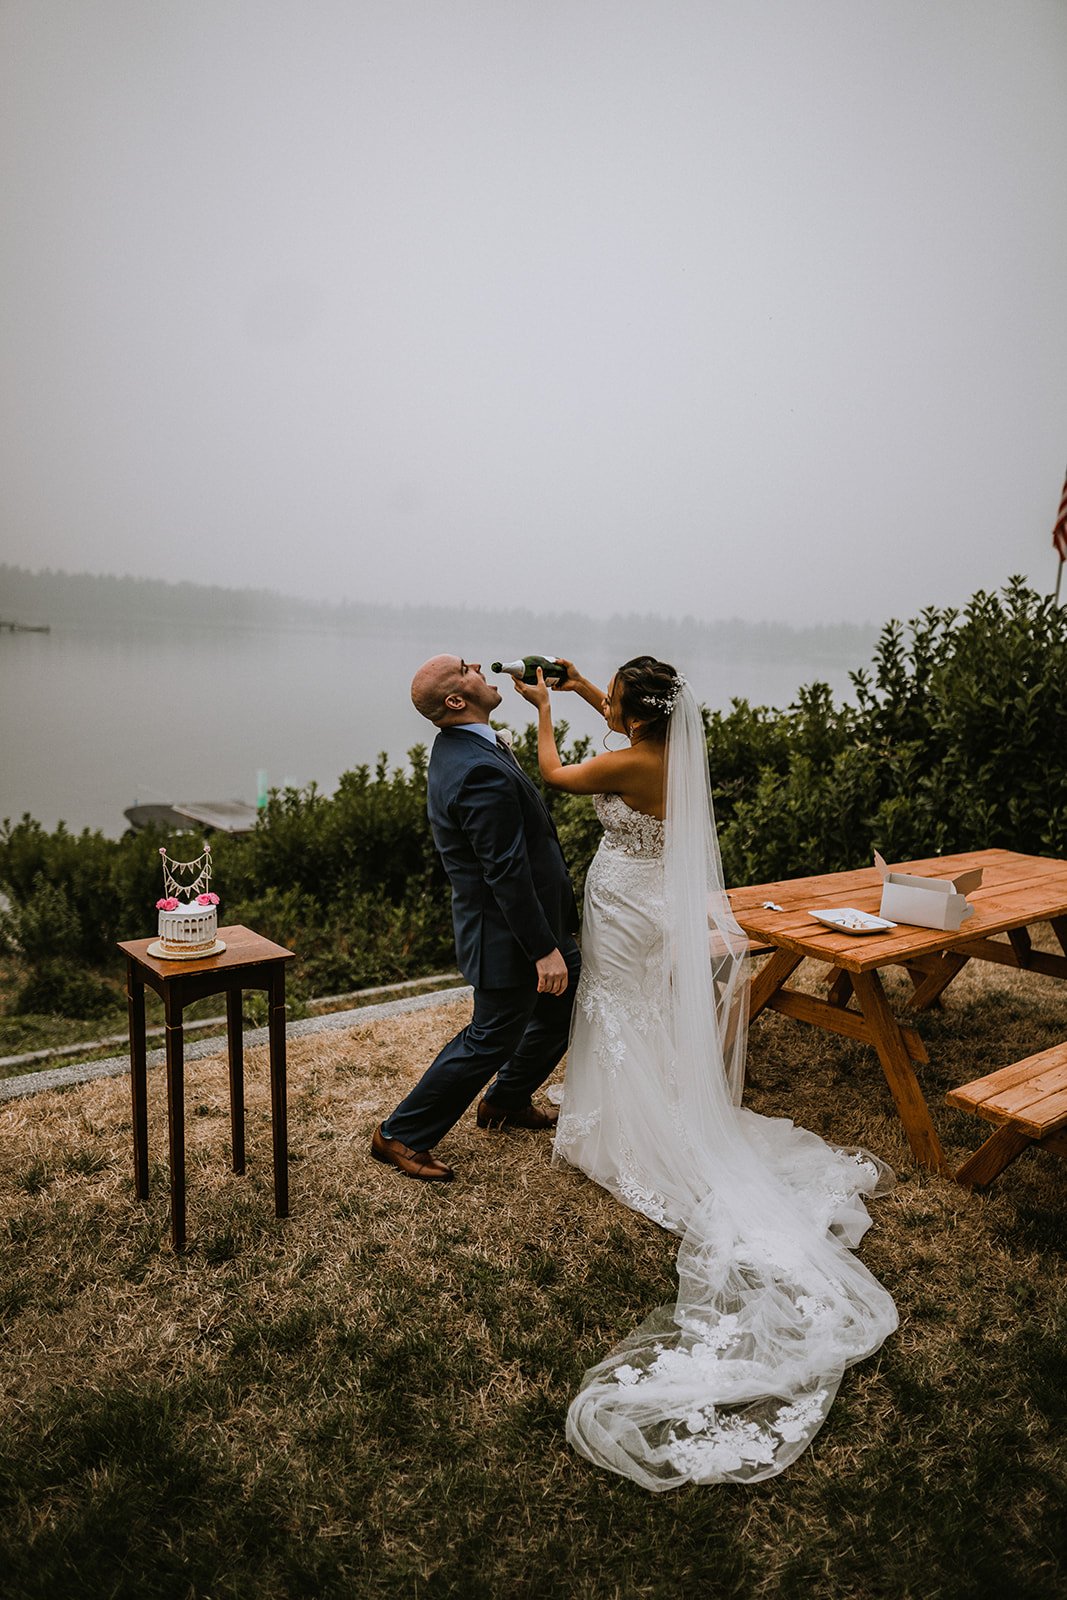 Groom kneels down so his bride can give him a sip of champagne from the bottle